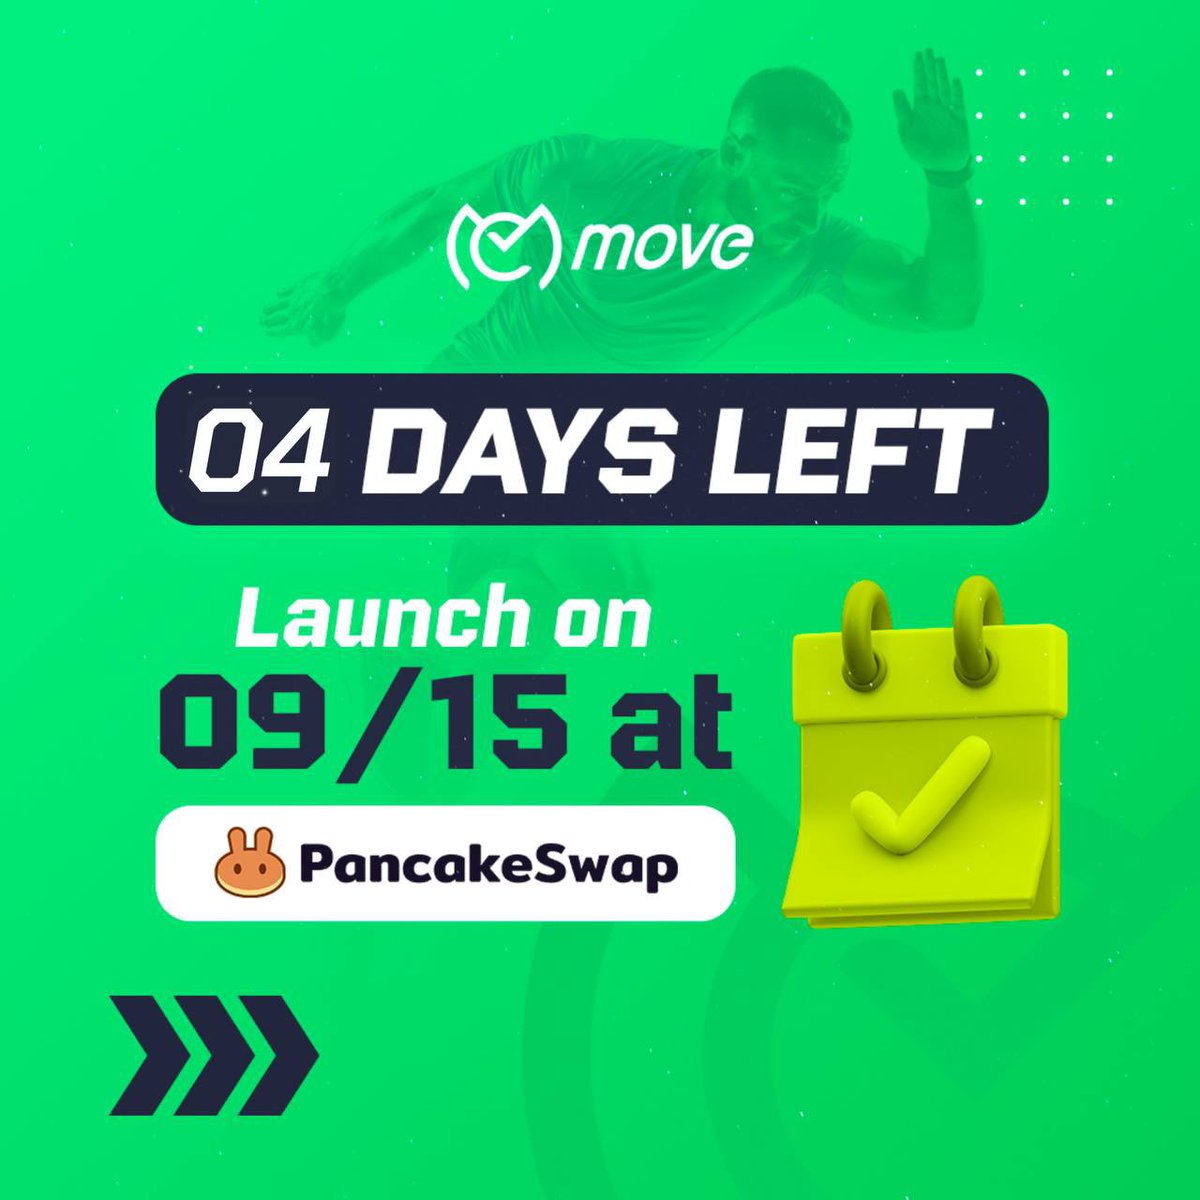 The race has begun, and there are only 04 days left until our big launch! 🚀 #MoveAppLaunch #launch #CryptoFitness